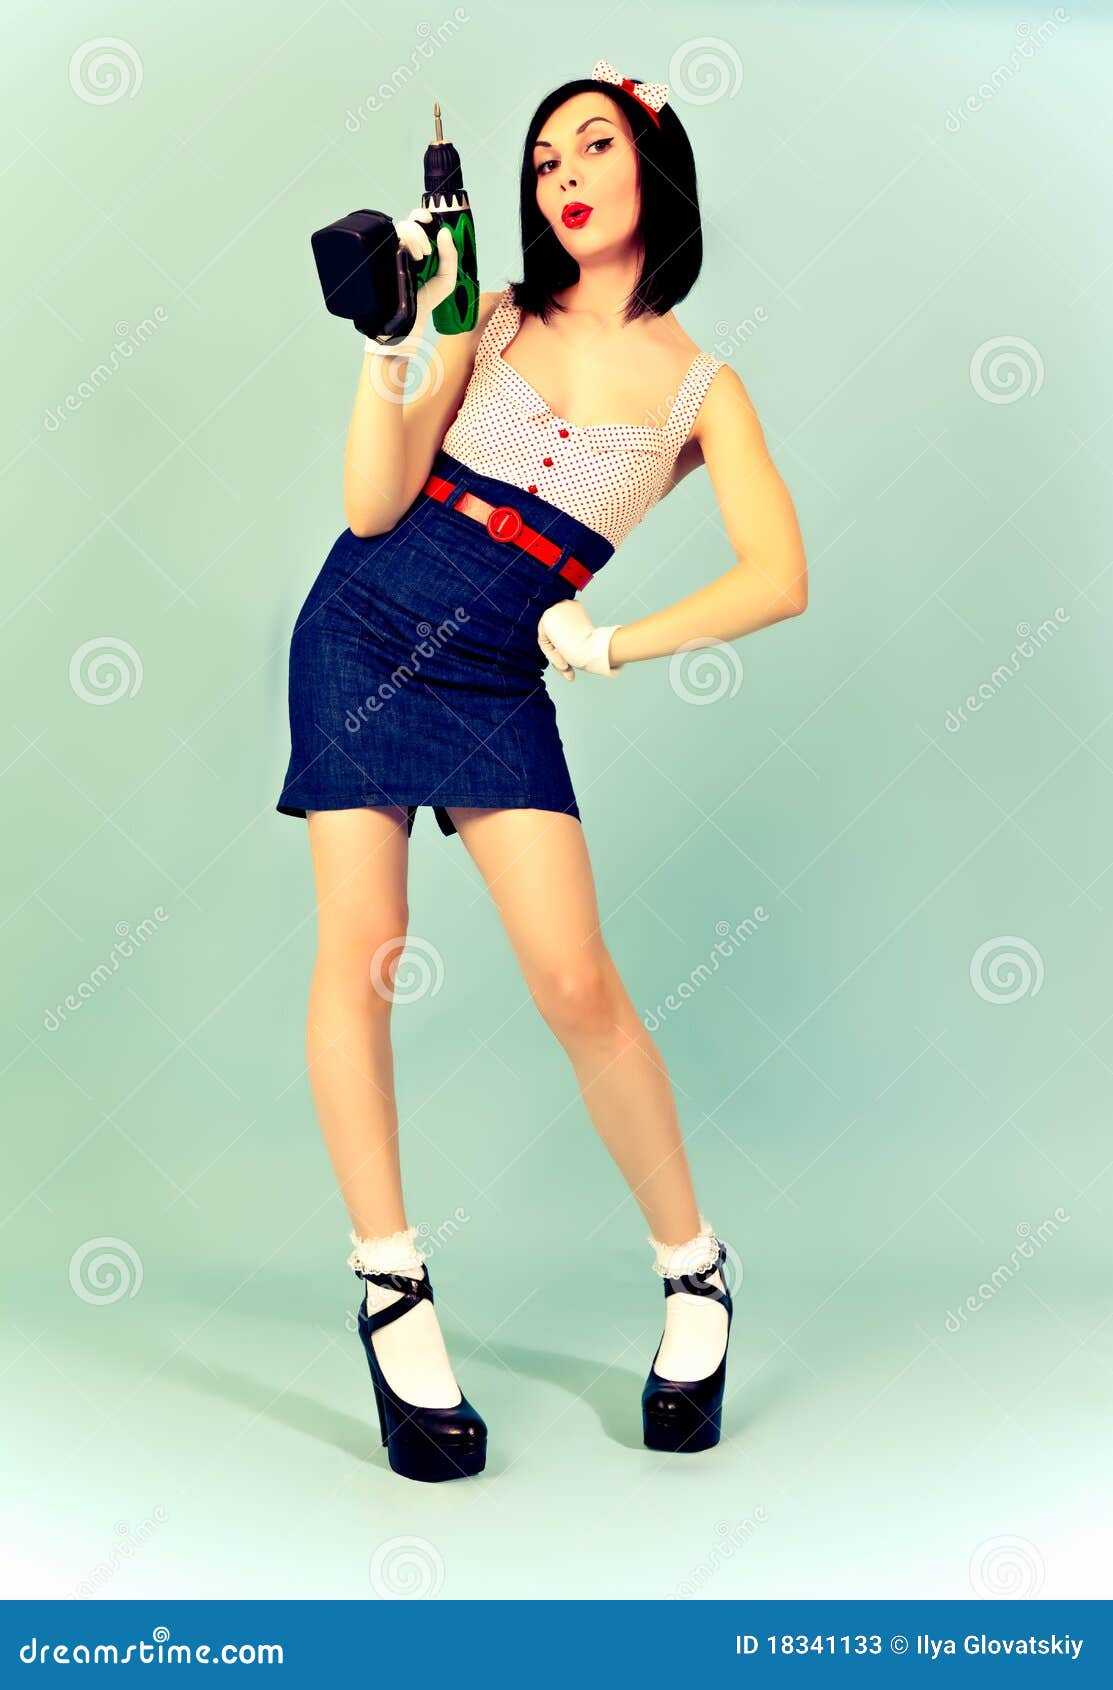 Picture Of Beautiful Pin Up Woman With Tool Stock Image